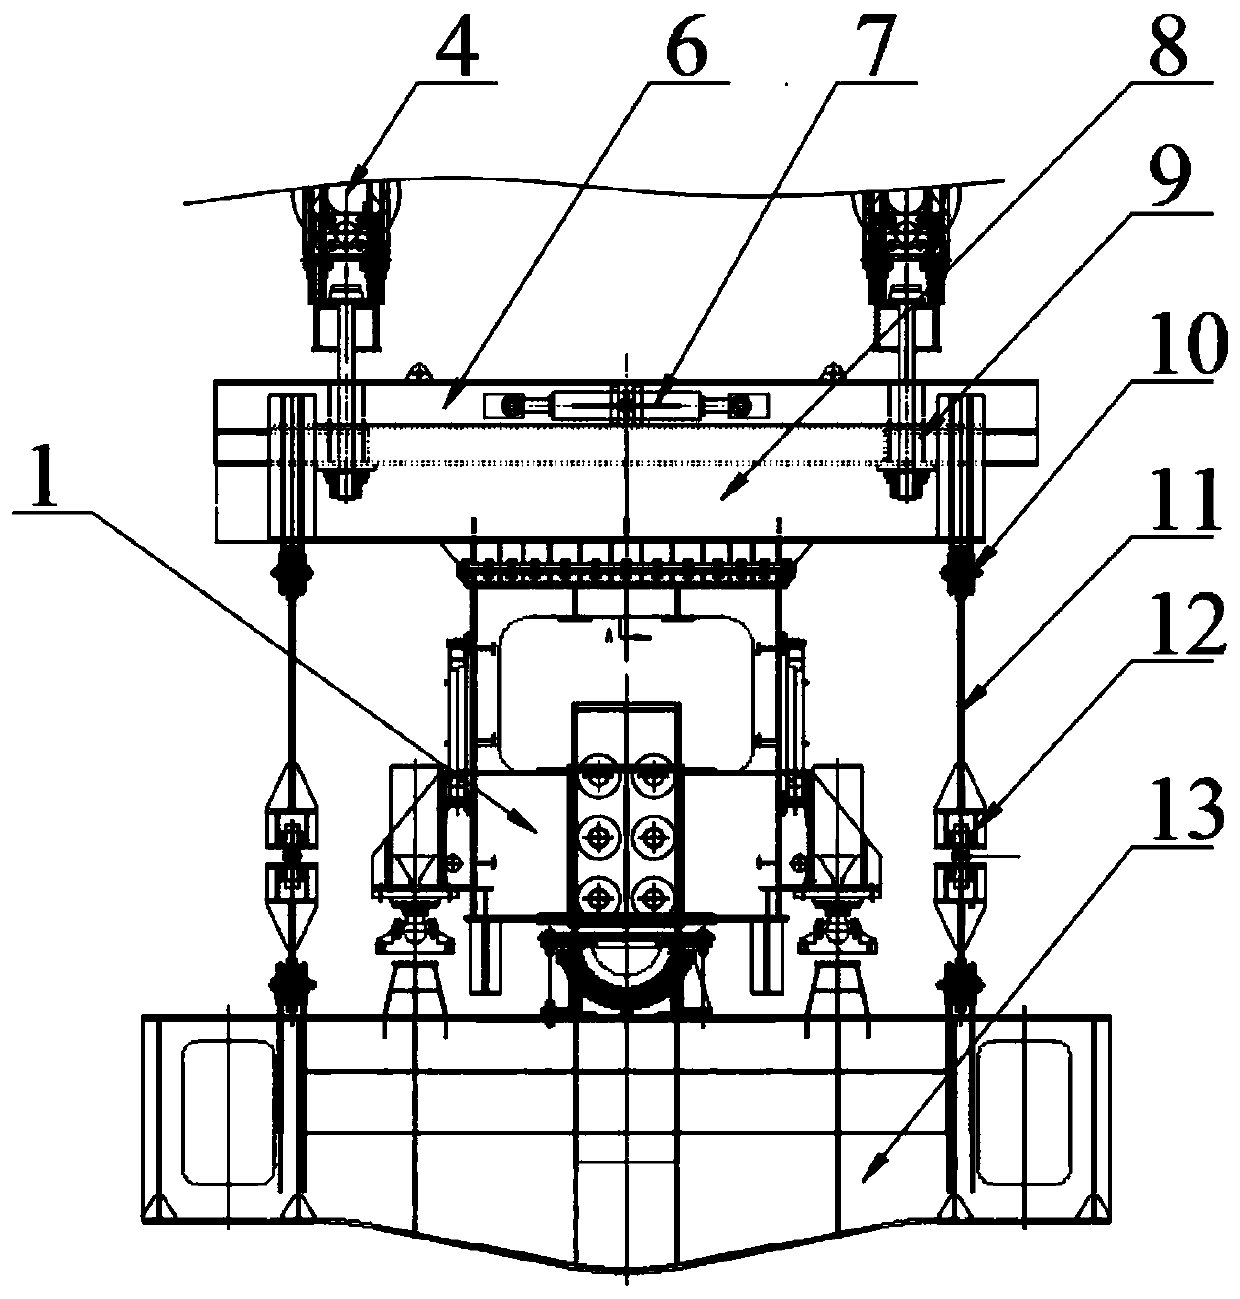 Special hoisting system for 900-ton transporting and erecting all-in-one machine